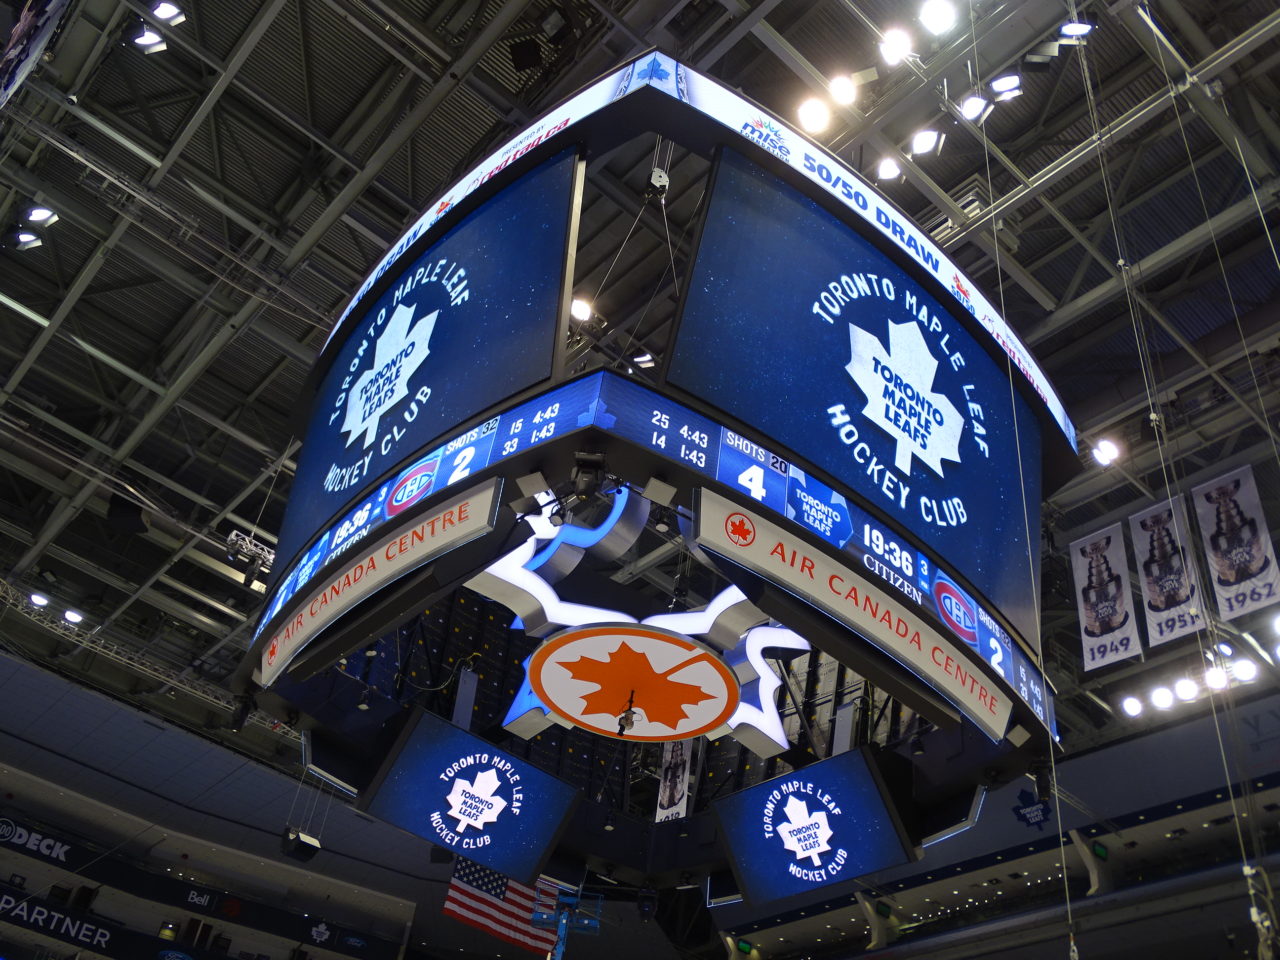 Toronto Maple Leafs, Air Canada Center, LED Scoreboard Display, Center Hung